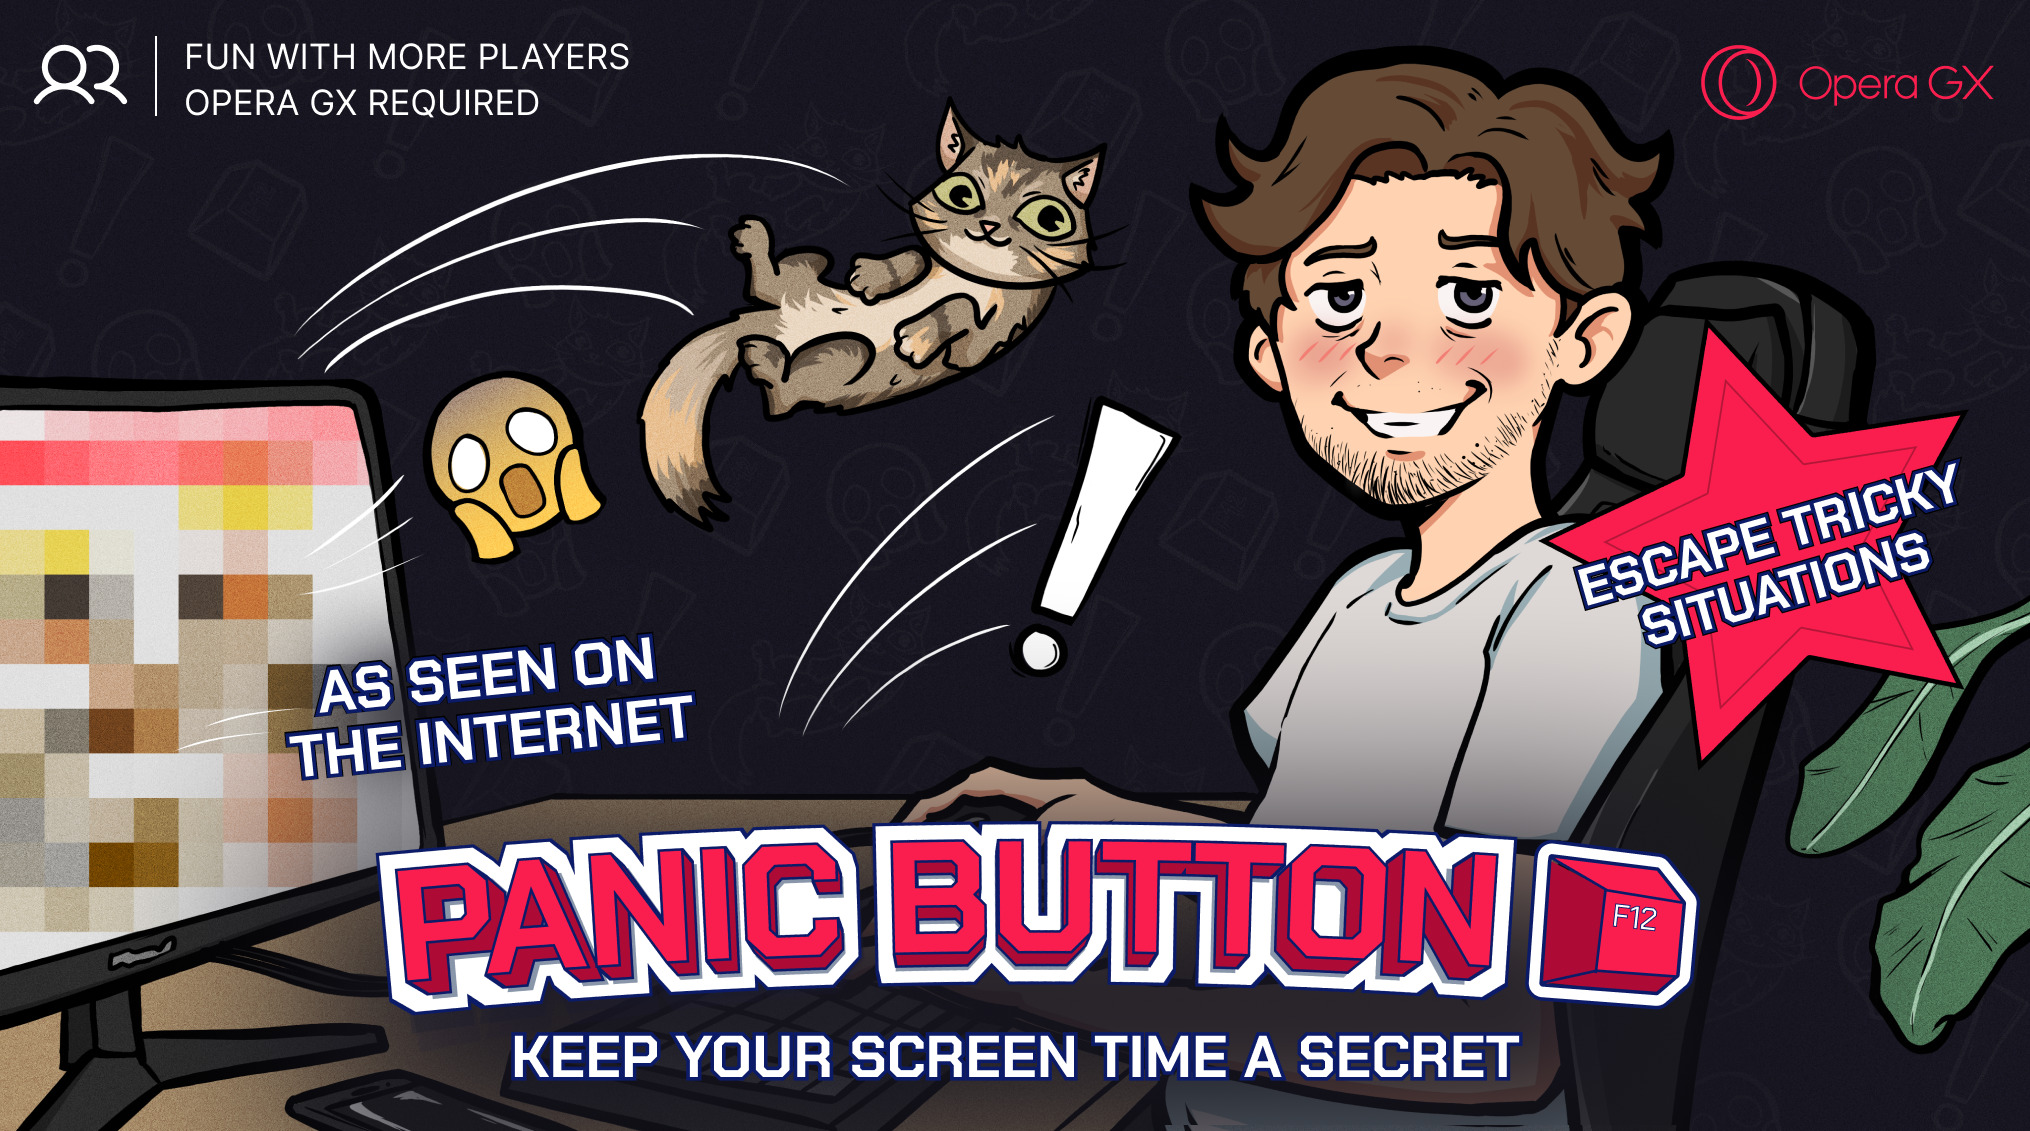 Escape tricky situations with the new Panic Button from Opera GX!